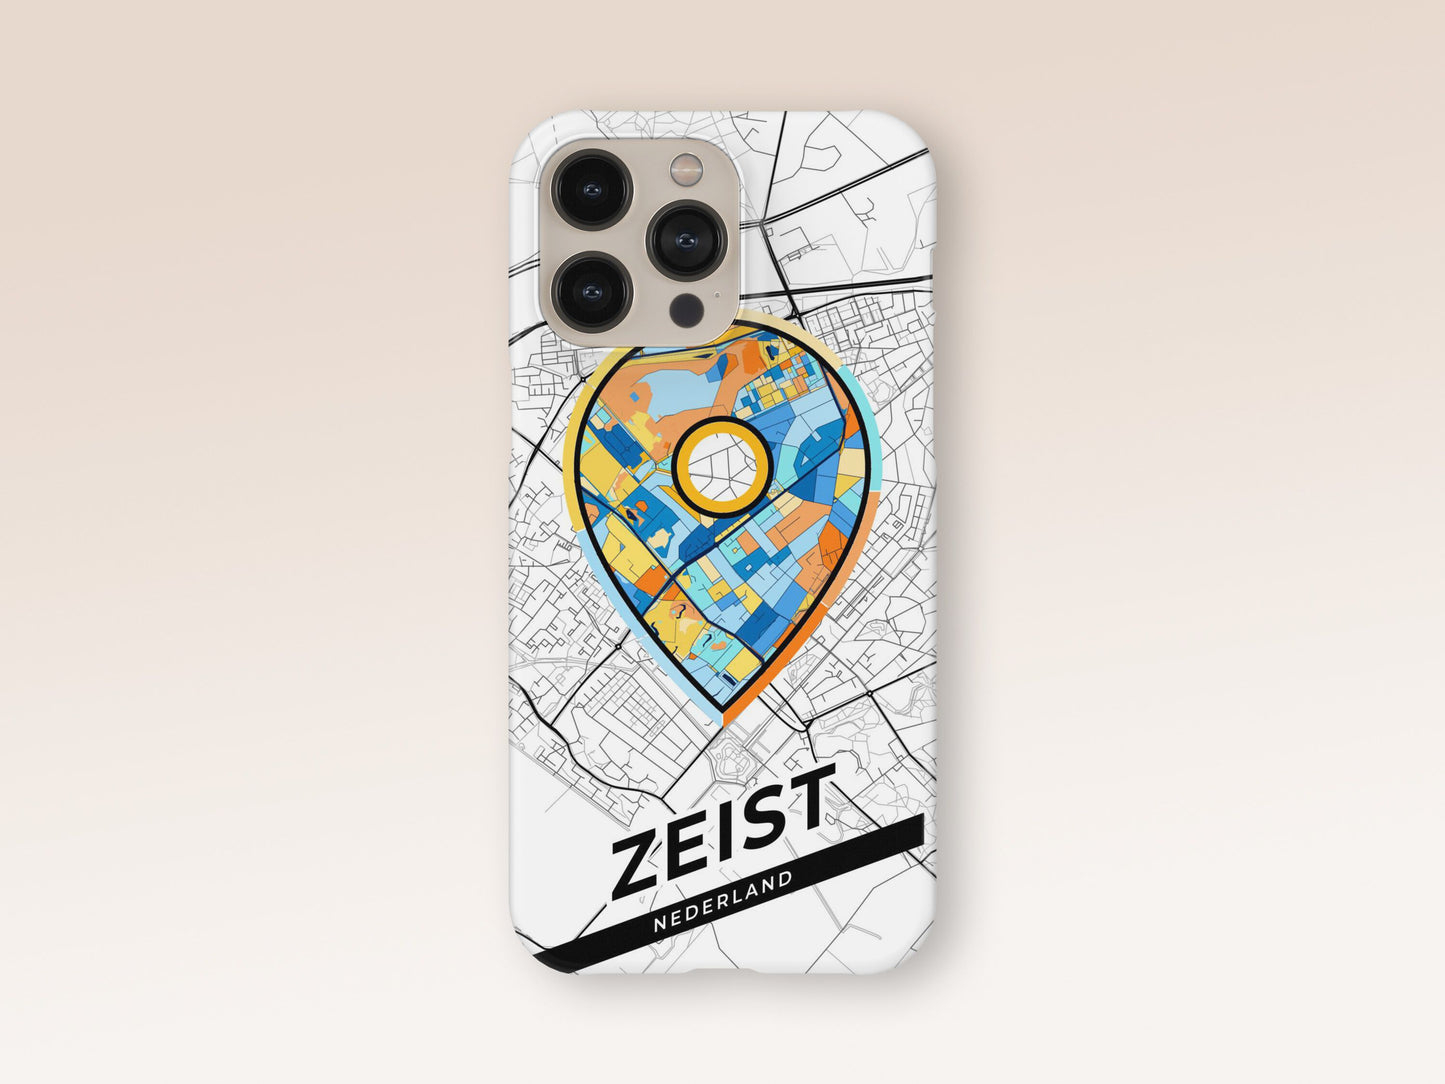 Zeist Netherlands slim phone case with colorful icon 1